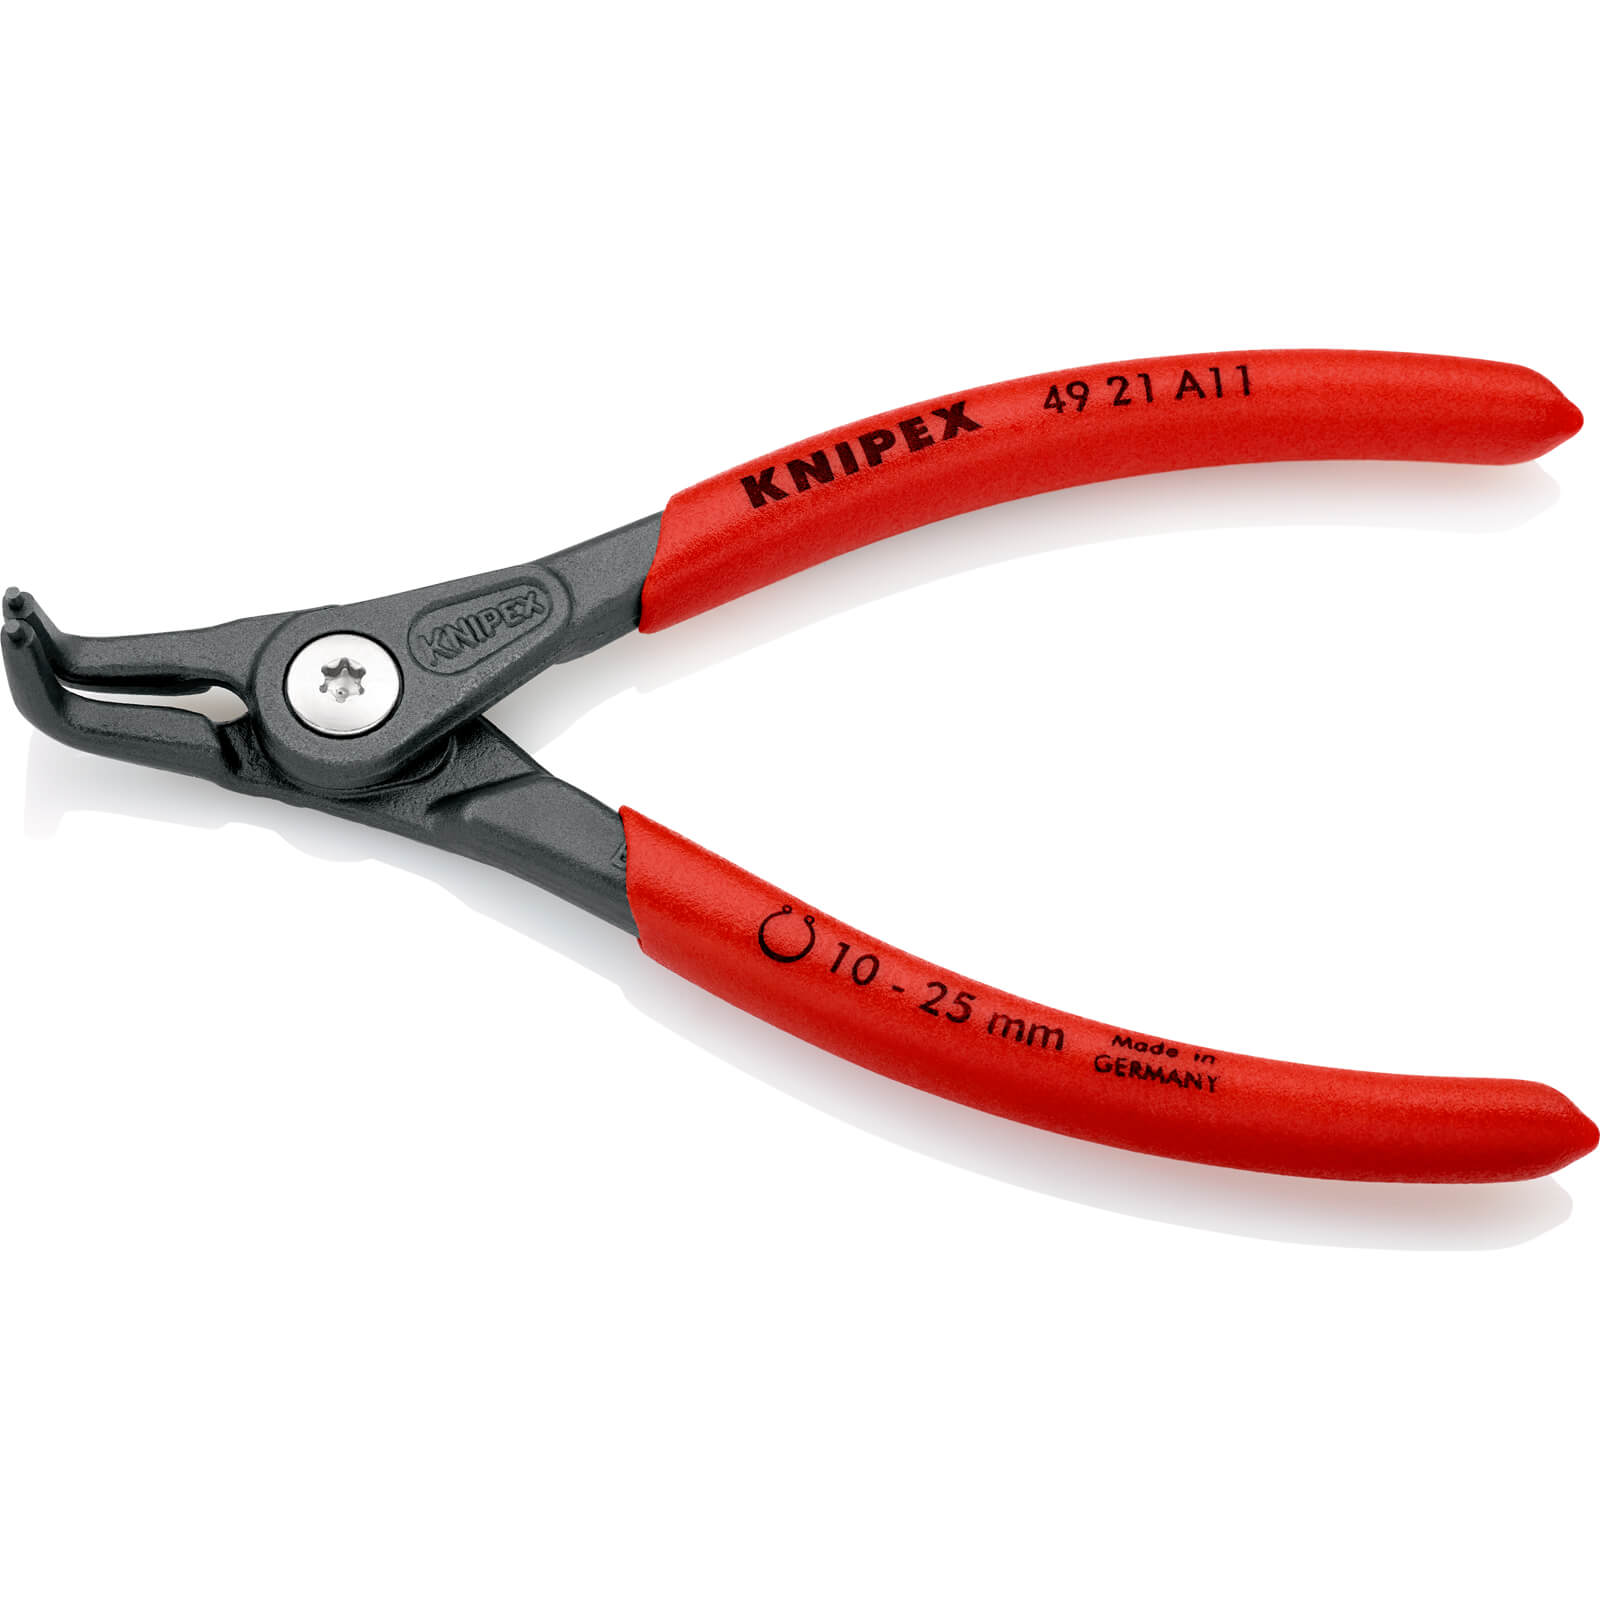 Image of Knipex 49 21 External 90 Degree Precision Circlip Pliers 10mm - 25mm